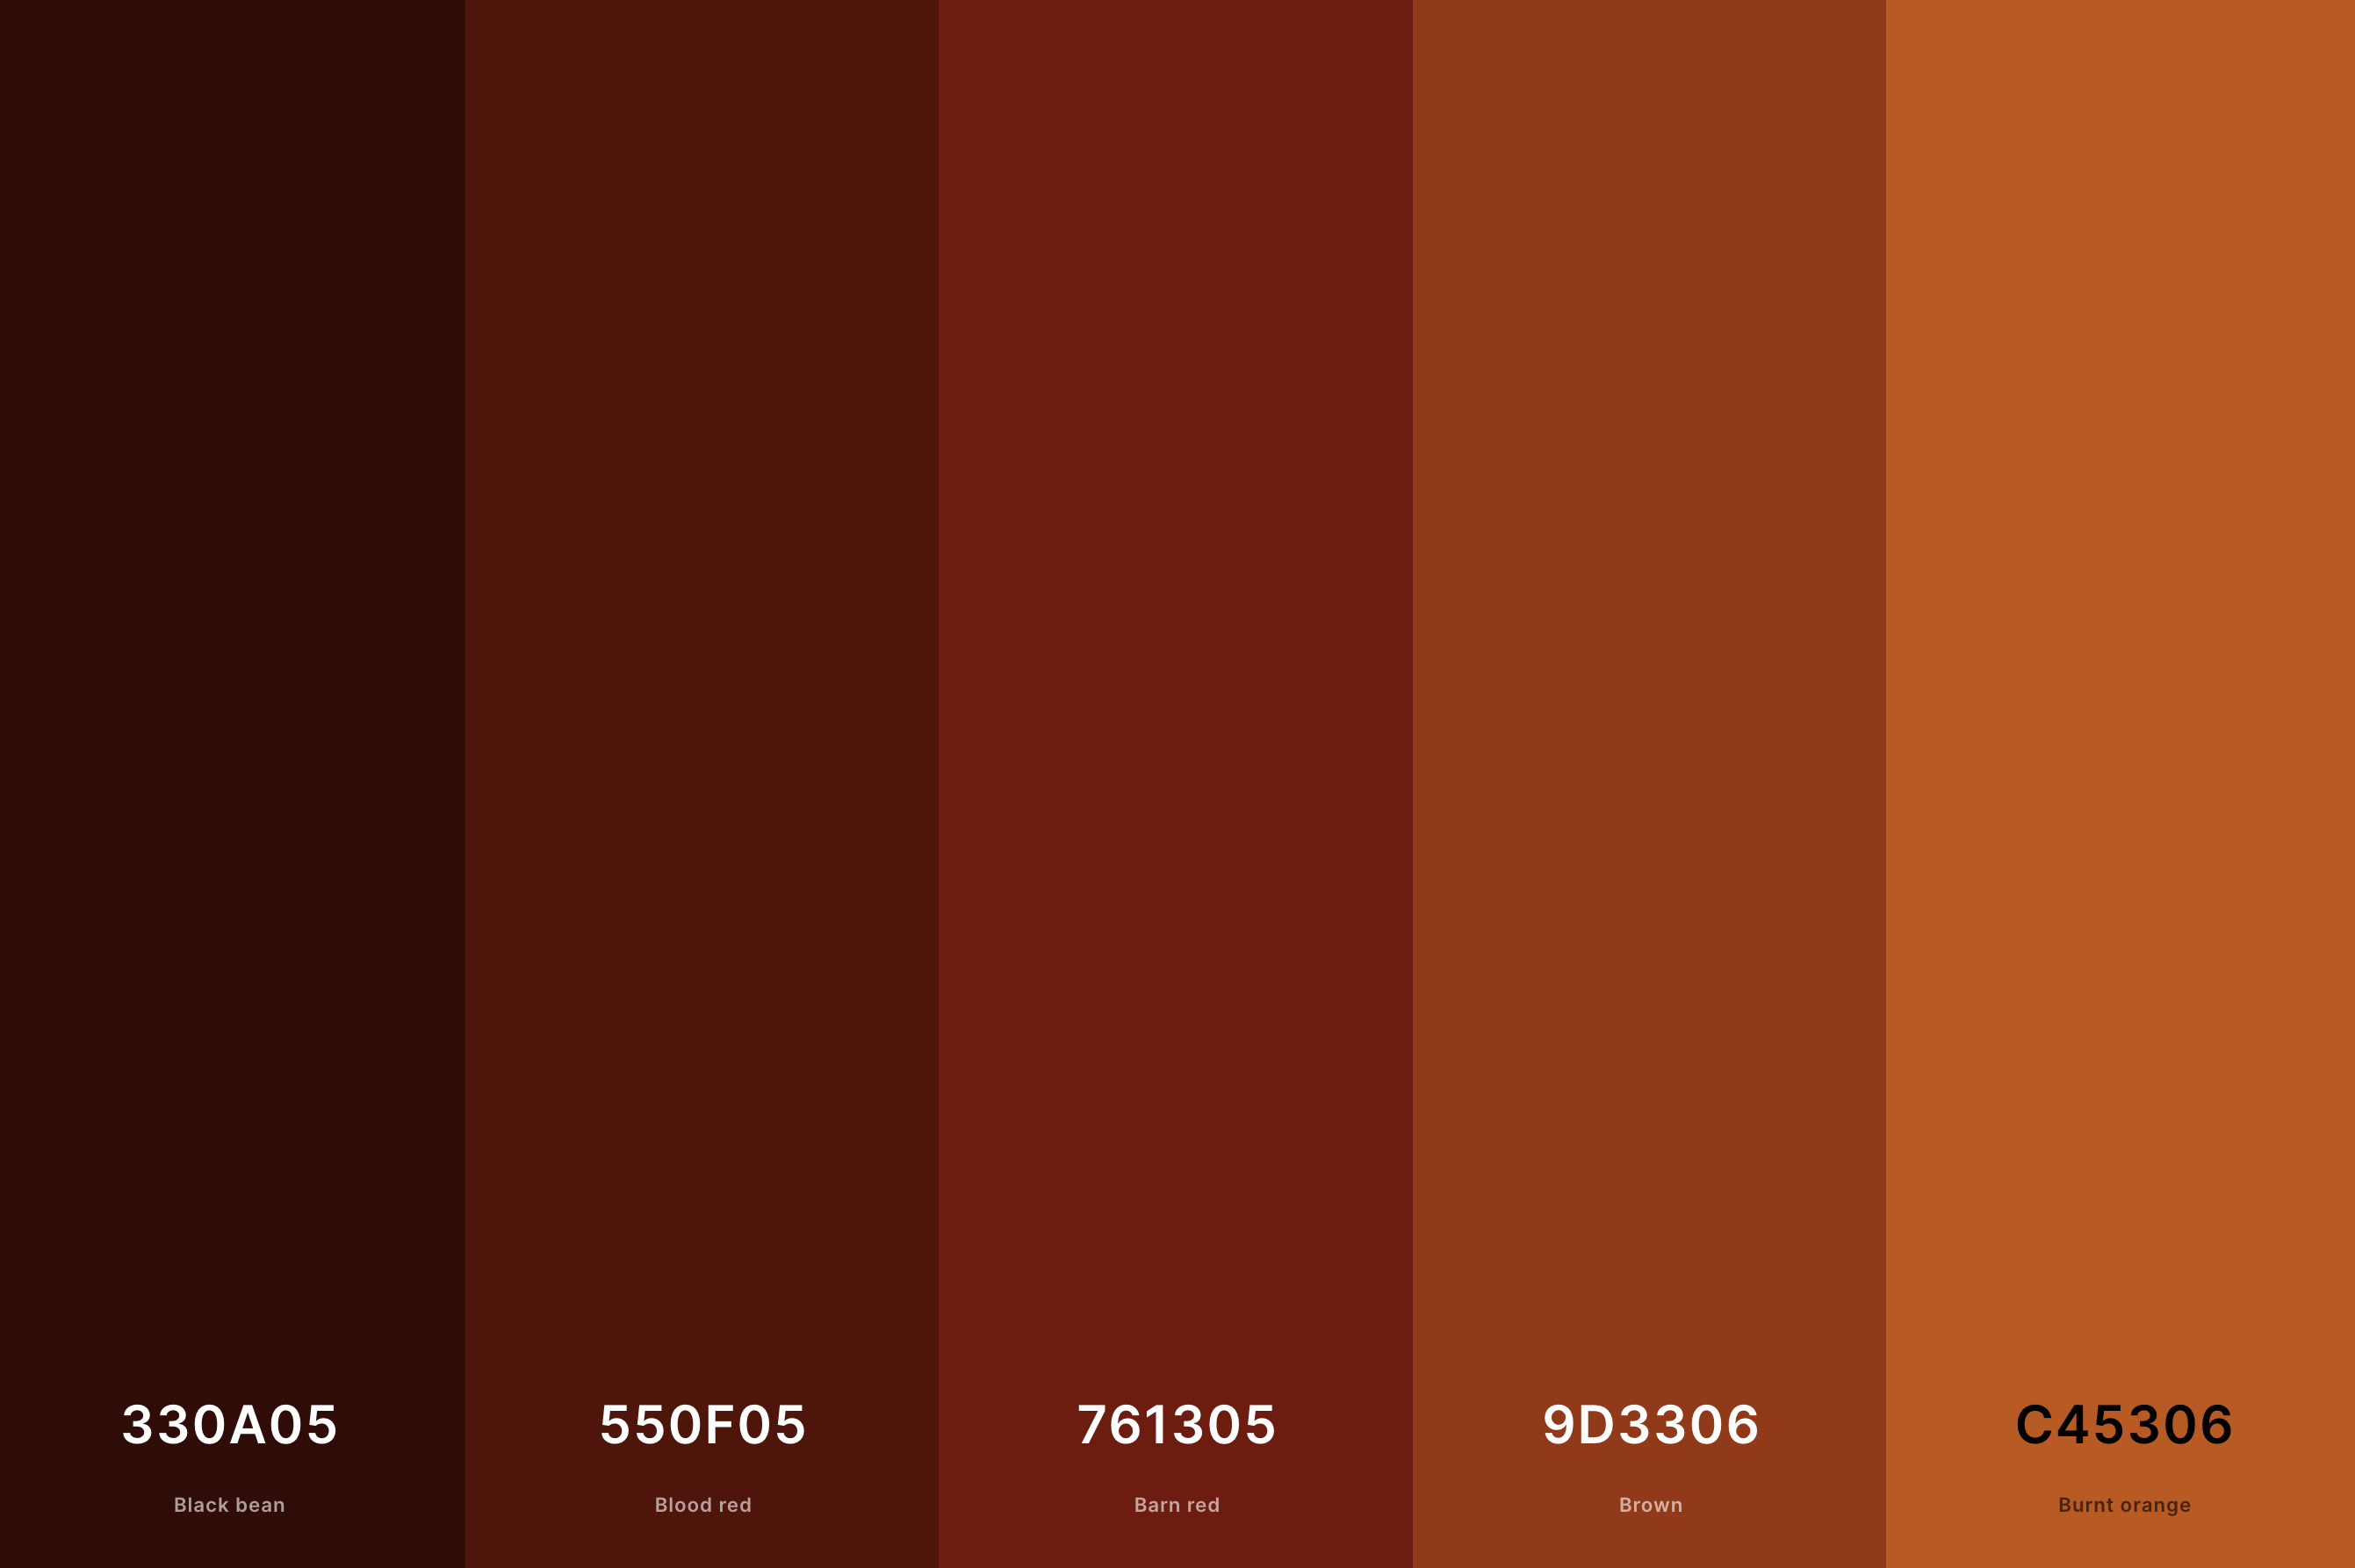 17. Dark Terracotta Color Palette Color Palette with Black Bean (Hex #330A05) + Blood Red (Hex #550F05) + Barn Red (Hex #761305) + Brown (Hex #9D3306) + Burnt Orange (Hex #C45306) Color Palette with Hex Codes